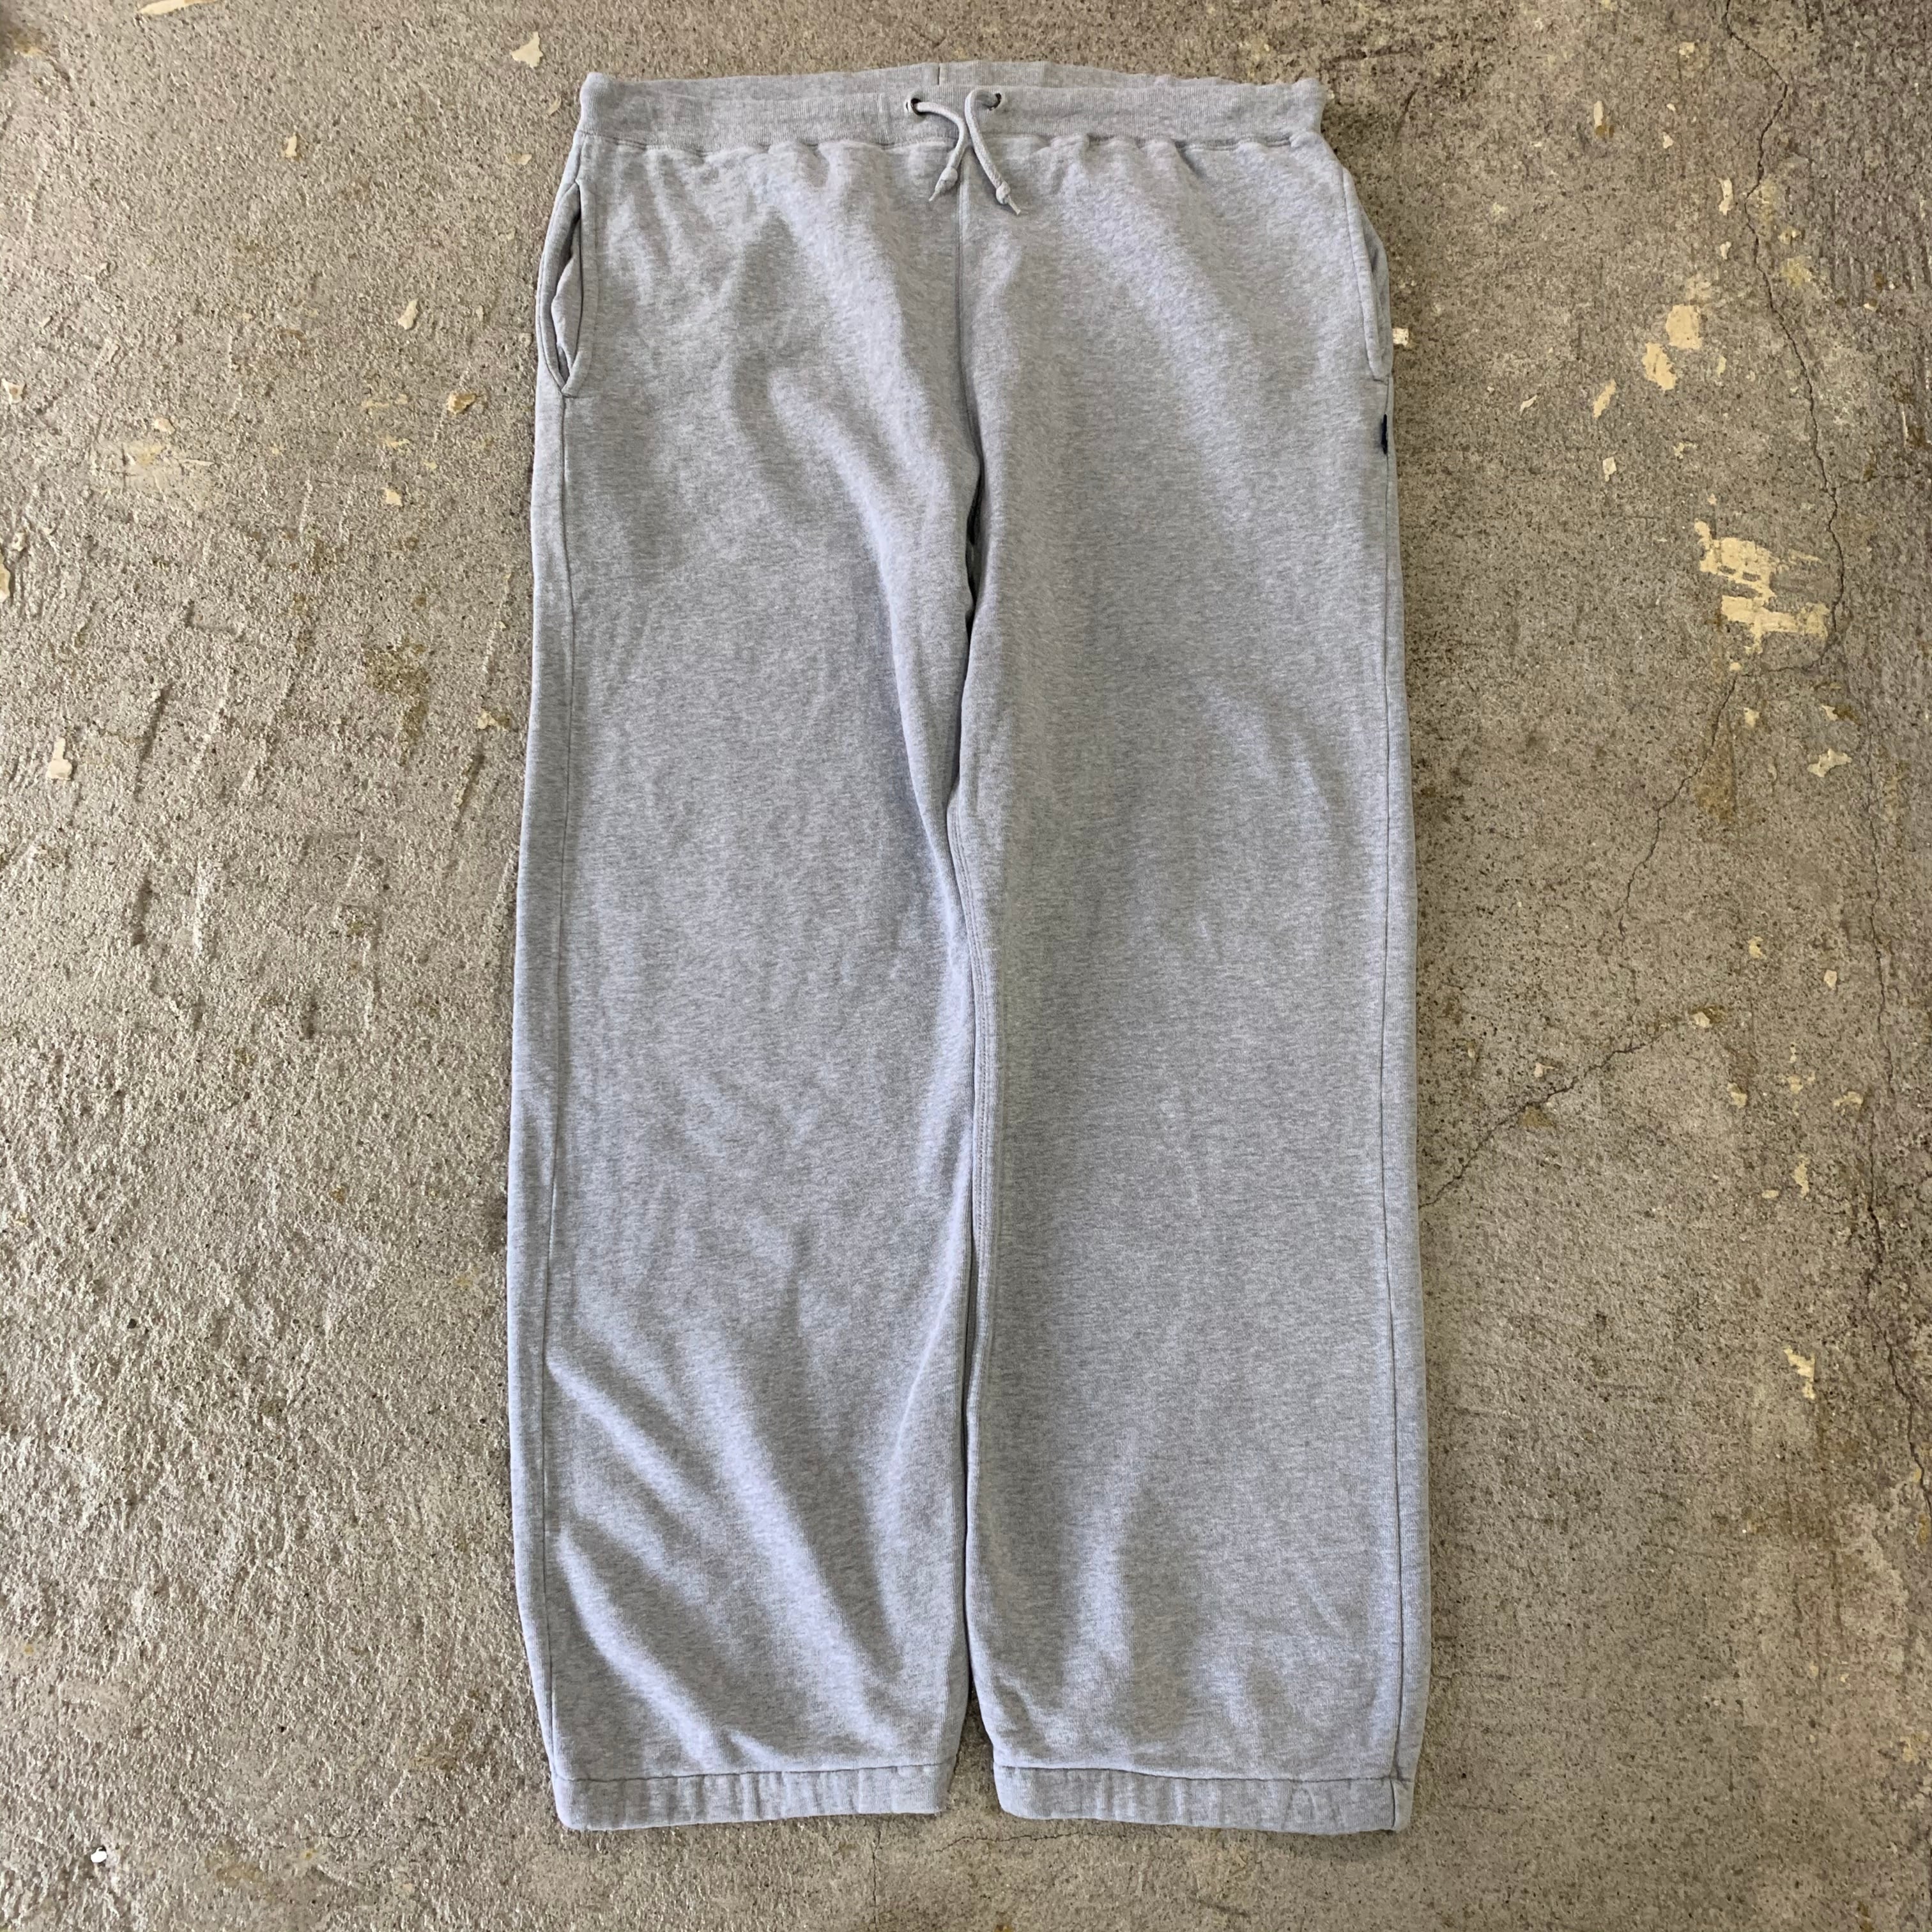 90s old GAP sweatpants | What'z up